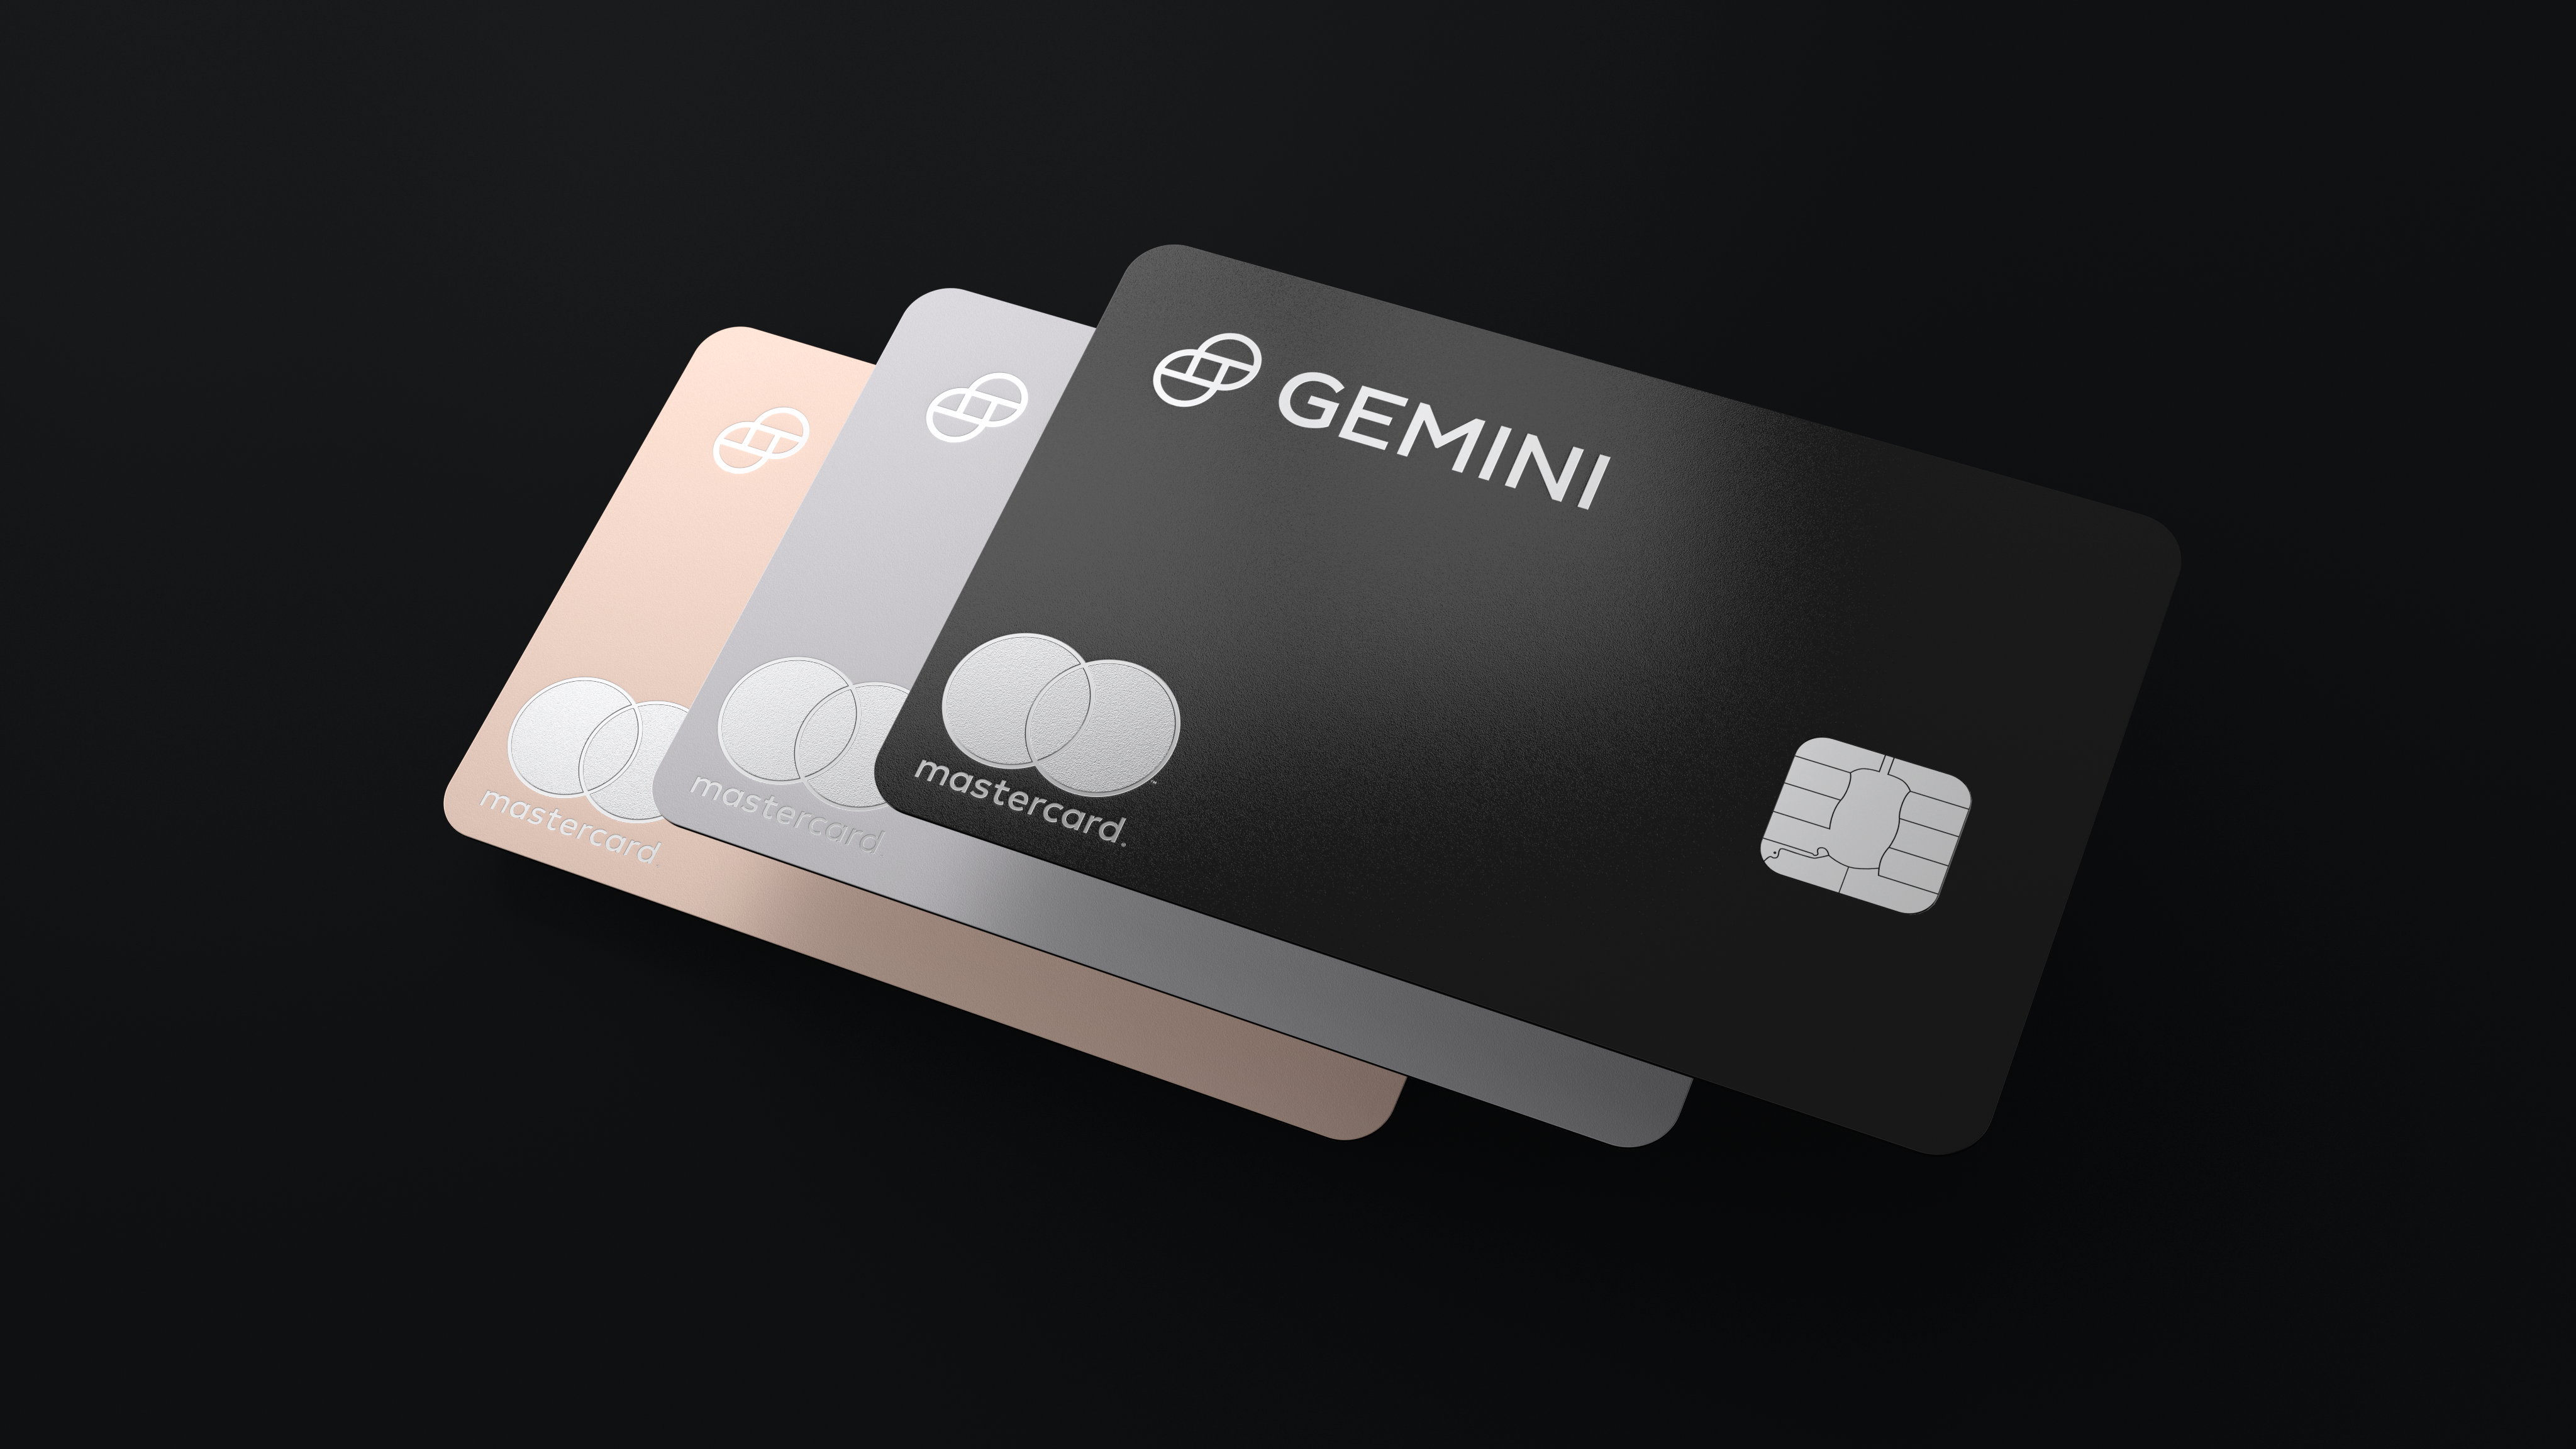 gemini fees for daily buying